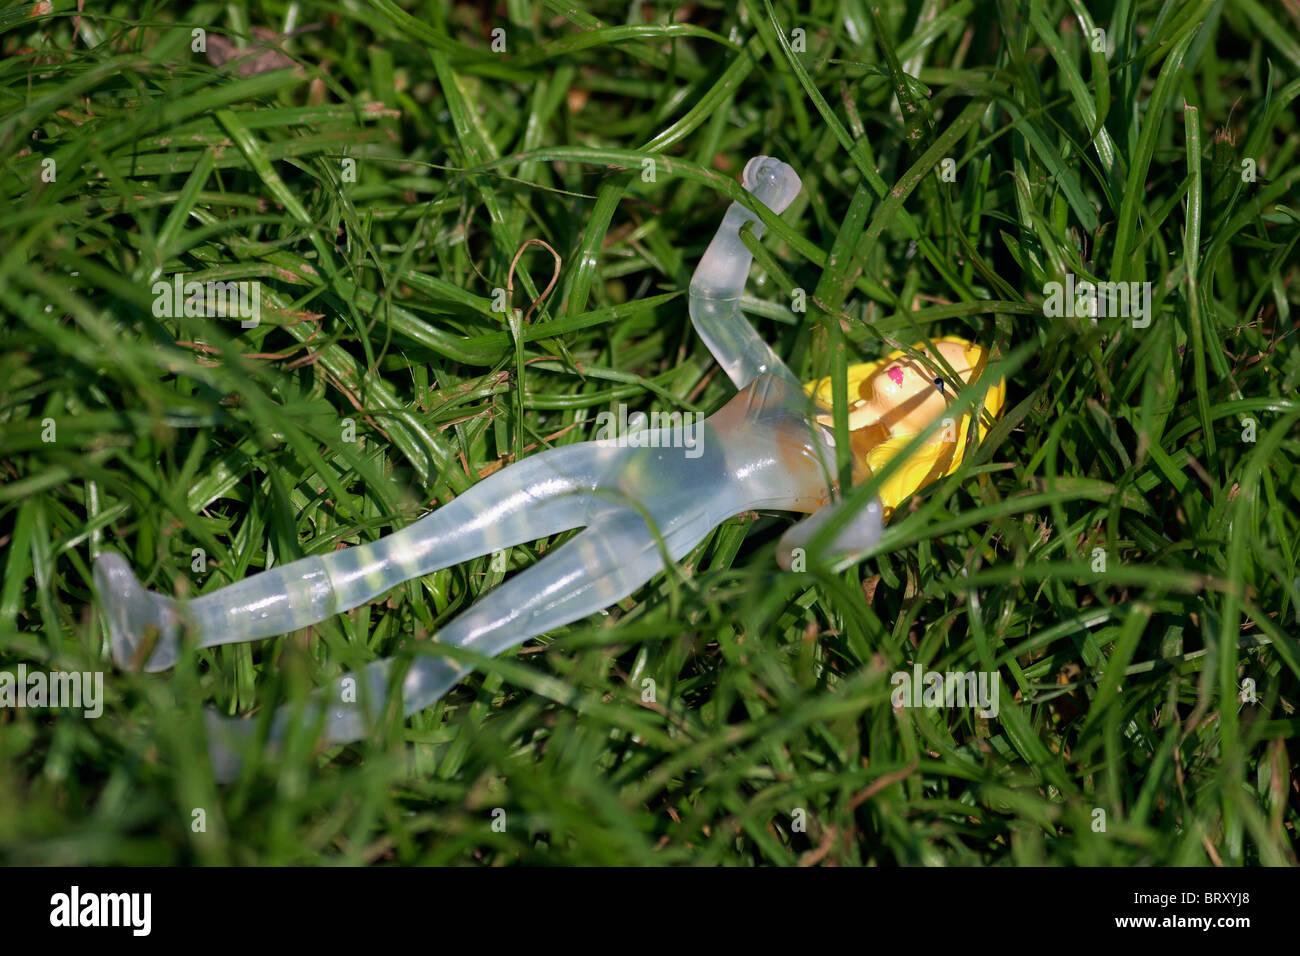 A female superhero toy lost in the grass. Stock Photo